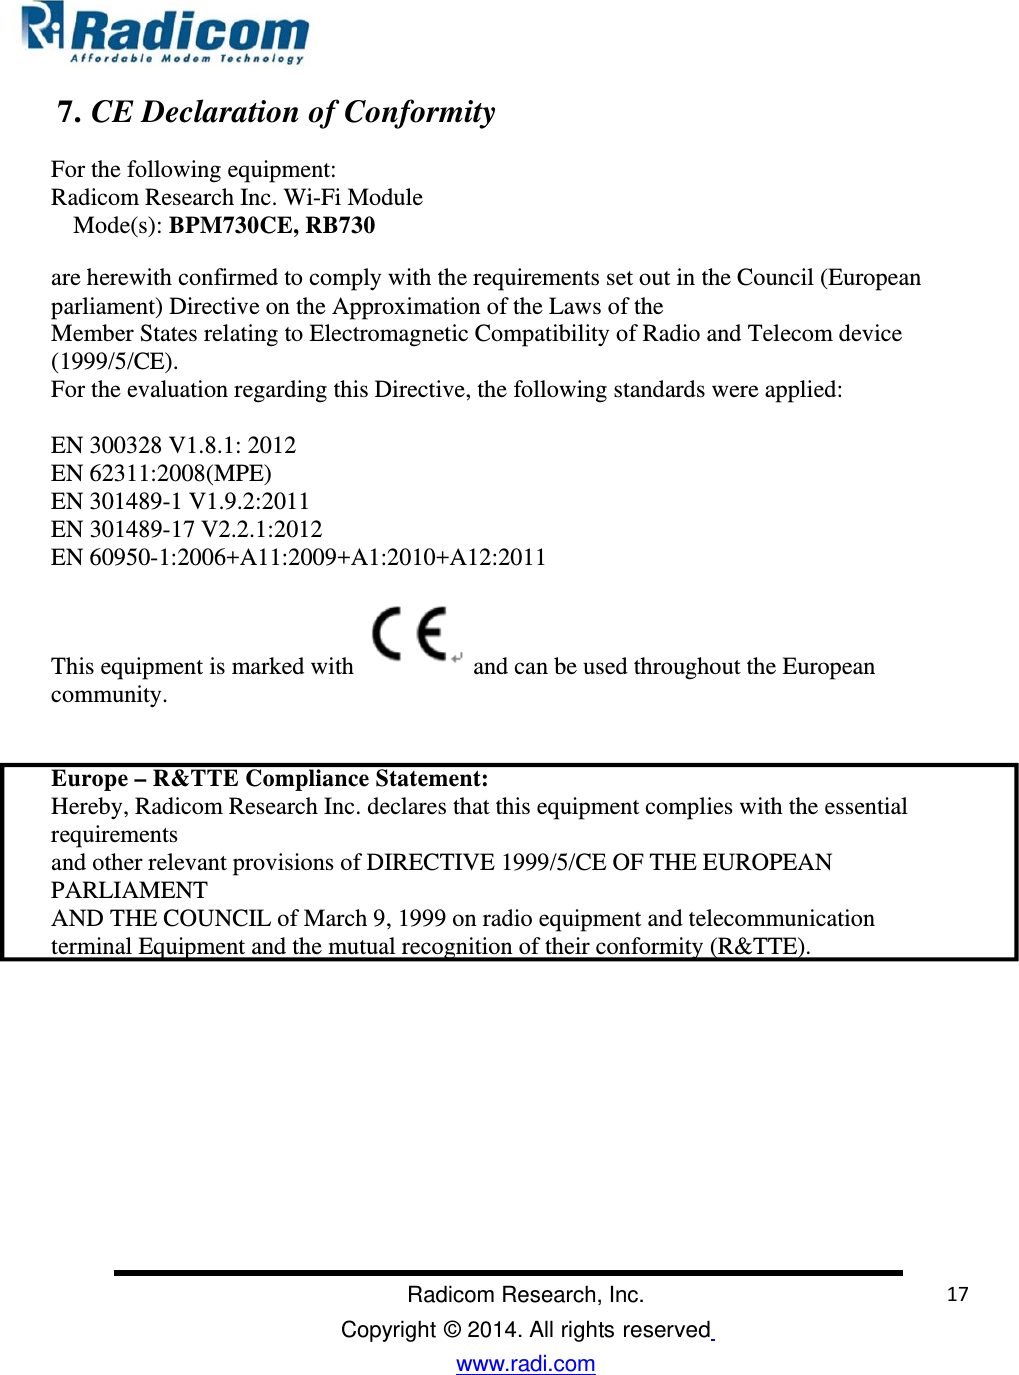                                                                                                                                               Radicom Research, Inc. Copyright © 2014. All rights reserved www.radi.com     7. CE Declaration of Conformity  For the following equipment:  Radicom Research Inc. Wi-Fi Module  Mode(s): BPM730CE, RB730 are herewith confirmed to comply with the requirements set out in the Council (European  parliament) Directive on the Approximation of the Laws of the  Member States relating to Electromagnetic Compatibility of Radio and Telecom device (1999/5/CE).  For the evaluation regarding this Directive, the following standards were applied:   EN 300328 V1.8.1: 2012 EN 62311:2008(MPE) EN 301489-1 V1.9.2:2011 EN 301489-17 V2.2.1:2012 EN 60950-1:2006+A11:2009+A1:2010+A12:2011     This equipment is marked with   and can be used throughout the European community.    Europe – R&amp;TTE Compliance Statement:  Hereby, Radicom Research Inc. declares that this equipment complies with the essential requirements and other relevant provisions of DIRECTIVE 1999/5/CE OF THE EUROPEAN PARLIAMENT  AND THE COUNCIL of March 9, 1999 on radio equipment and telecommunication terminal Equipment and the mutual recognition of their conformity (R&amp;TTE).                                                                                                              17 